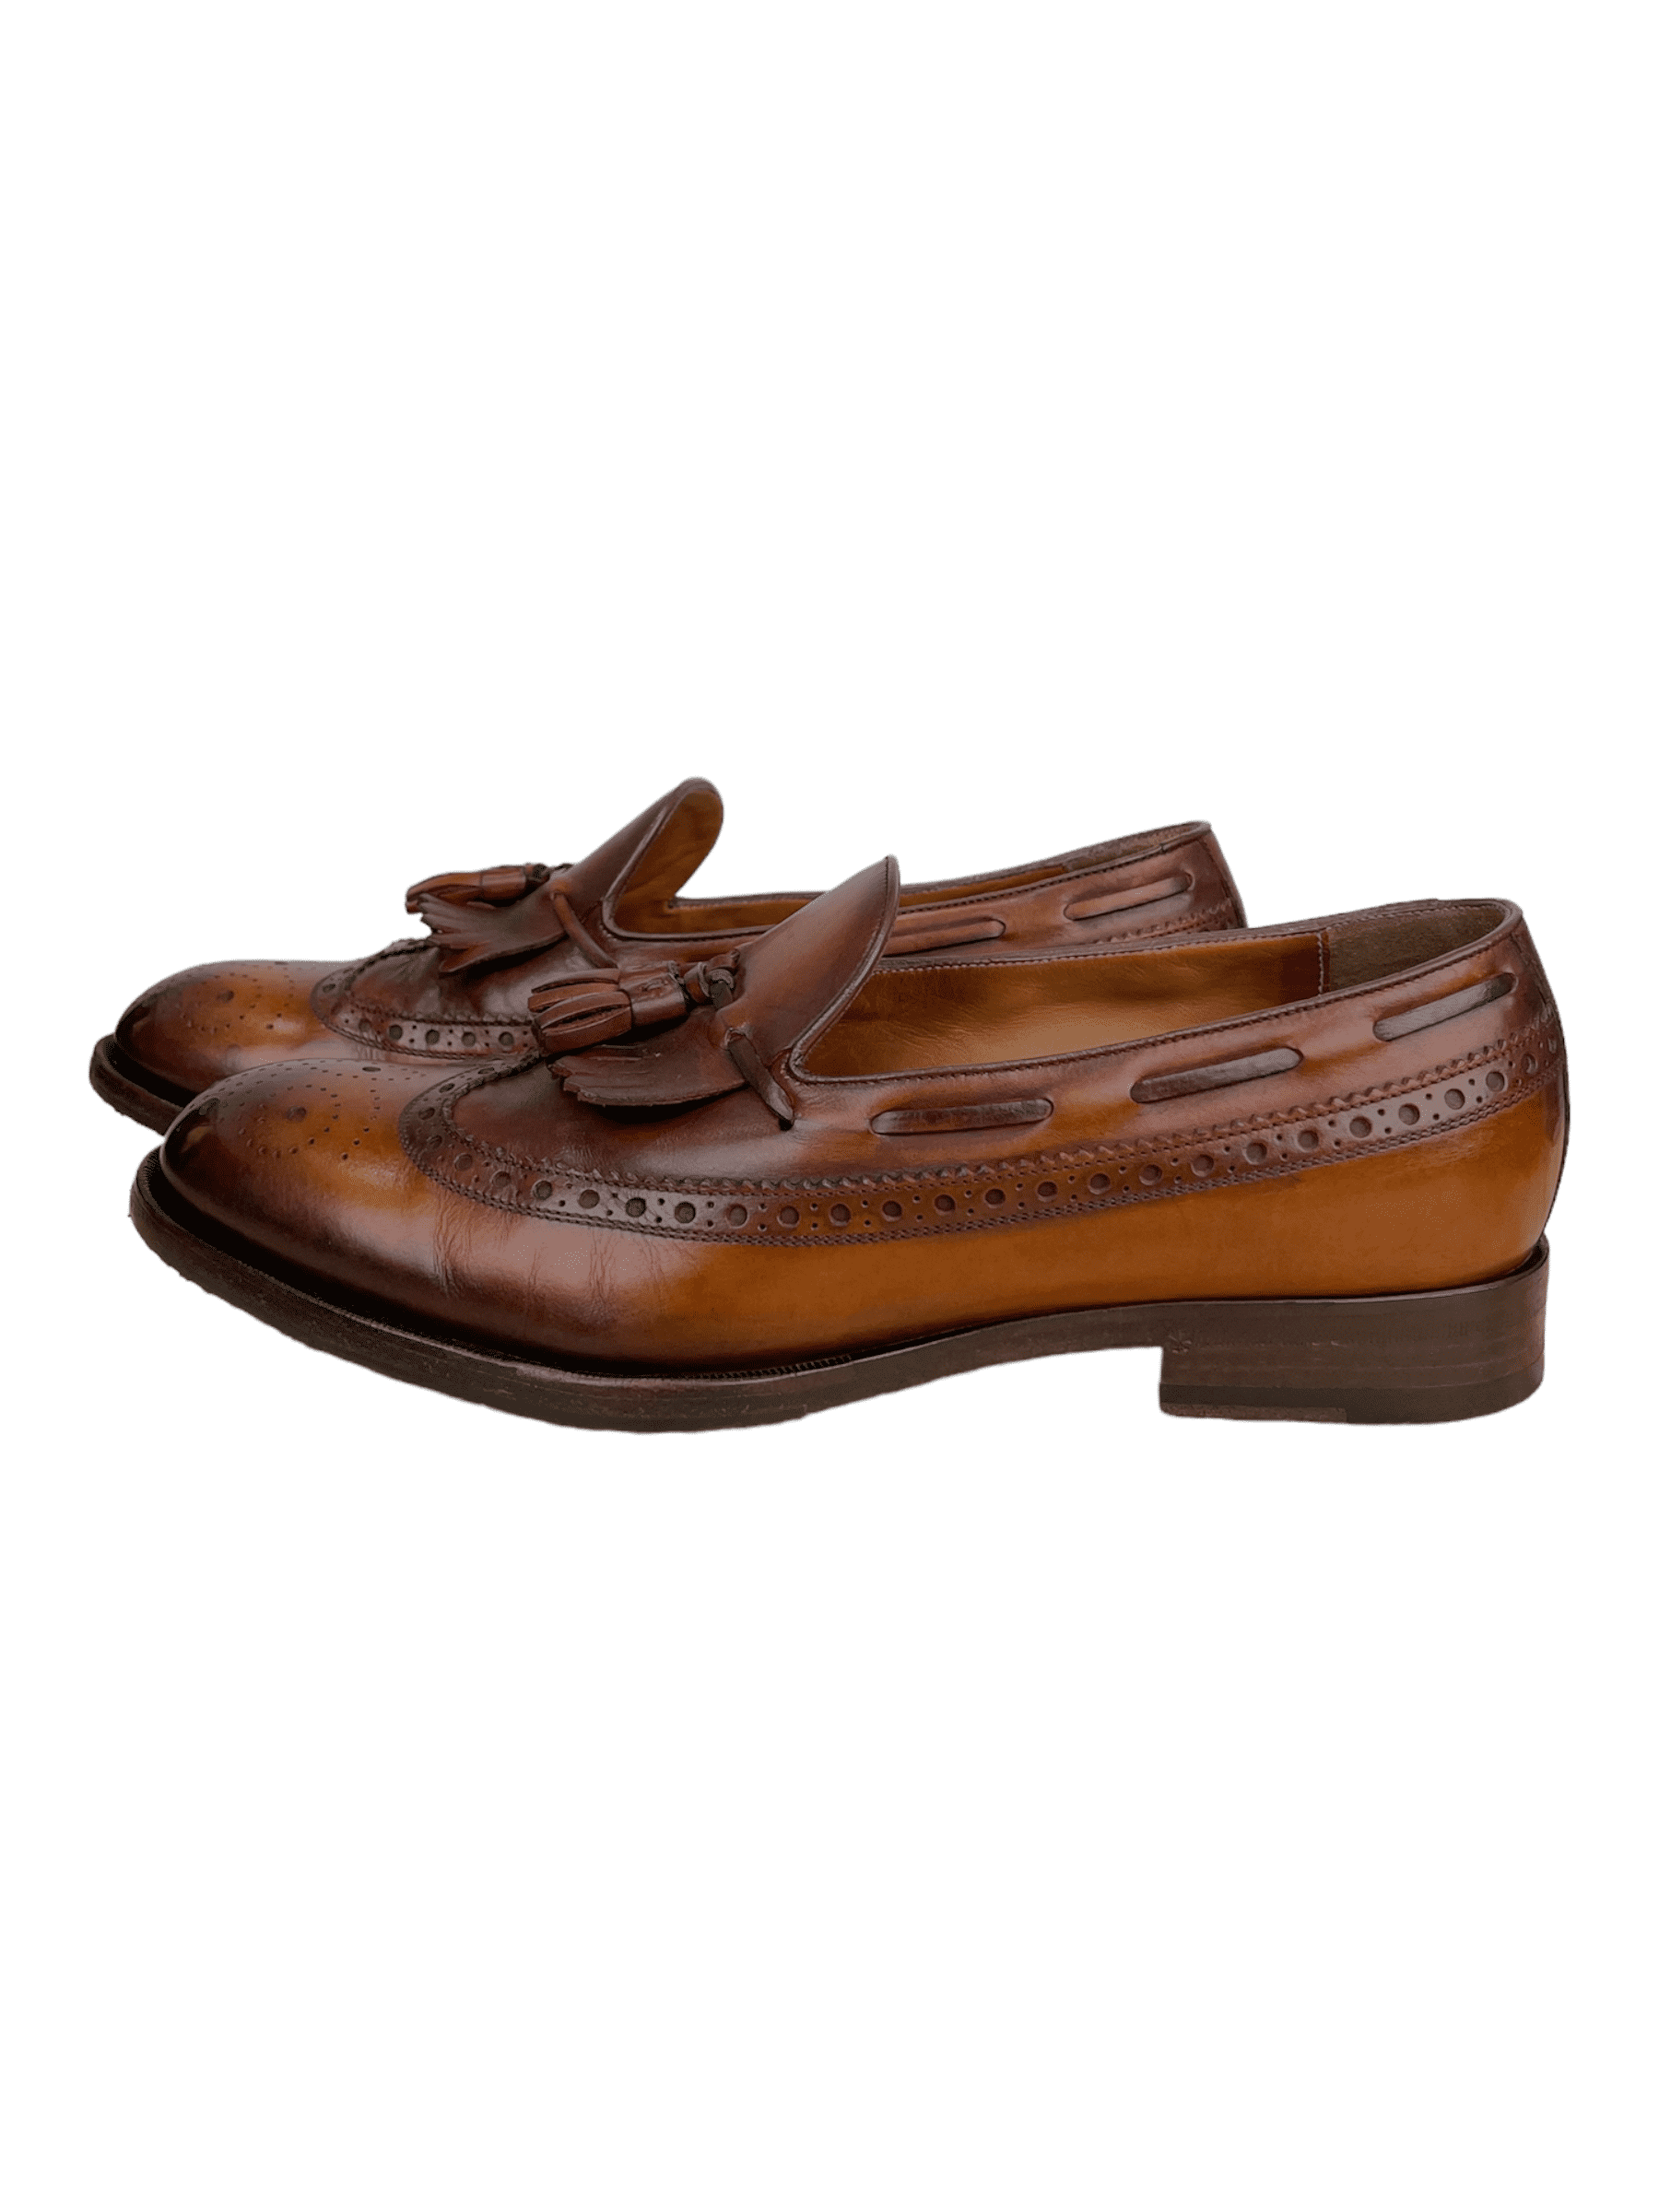 Gucci Brown Leather Tassel Loafers - Genuine Design Luxury Consignment Calgary, Alberta, Canada New and Pre-Owned Clothing, Shoes, Accessories.